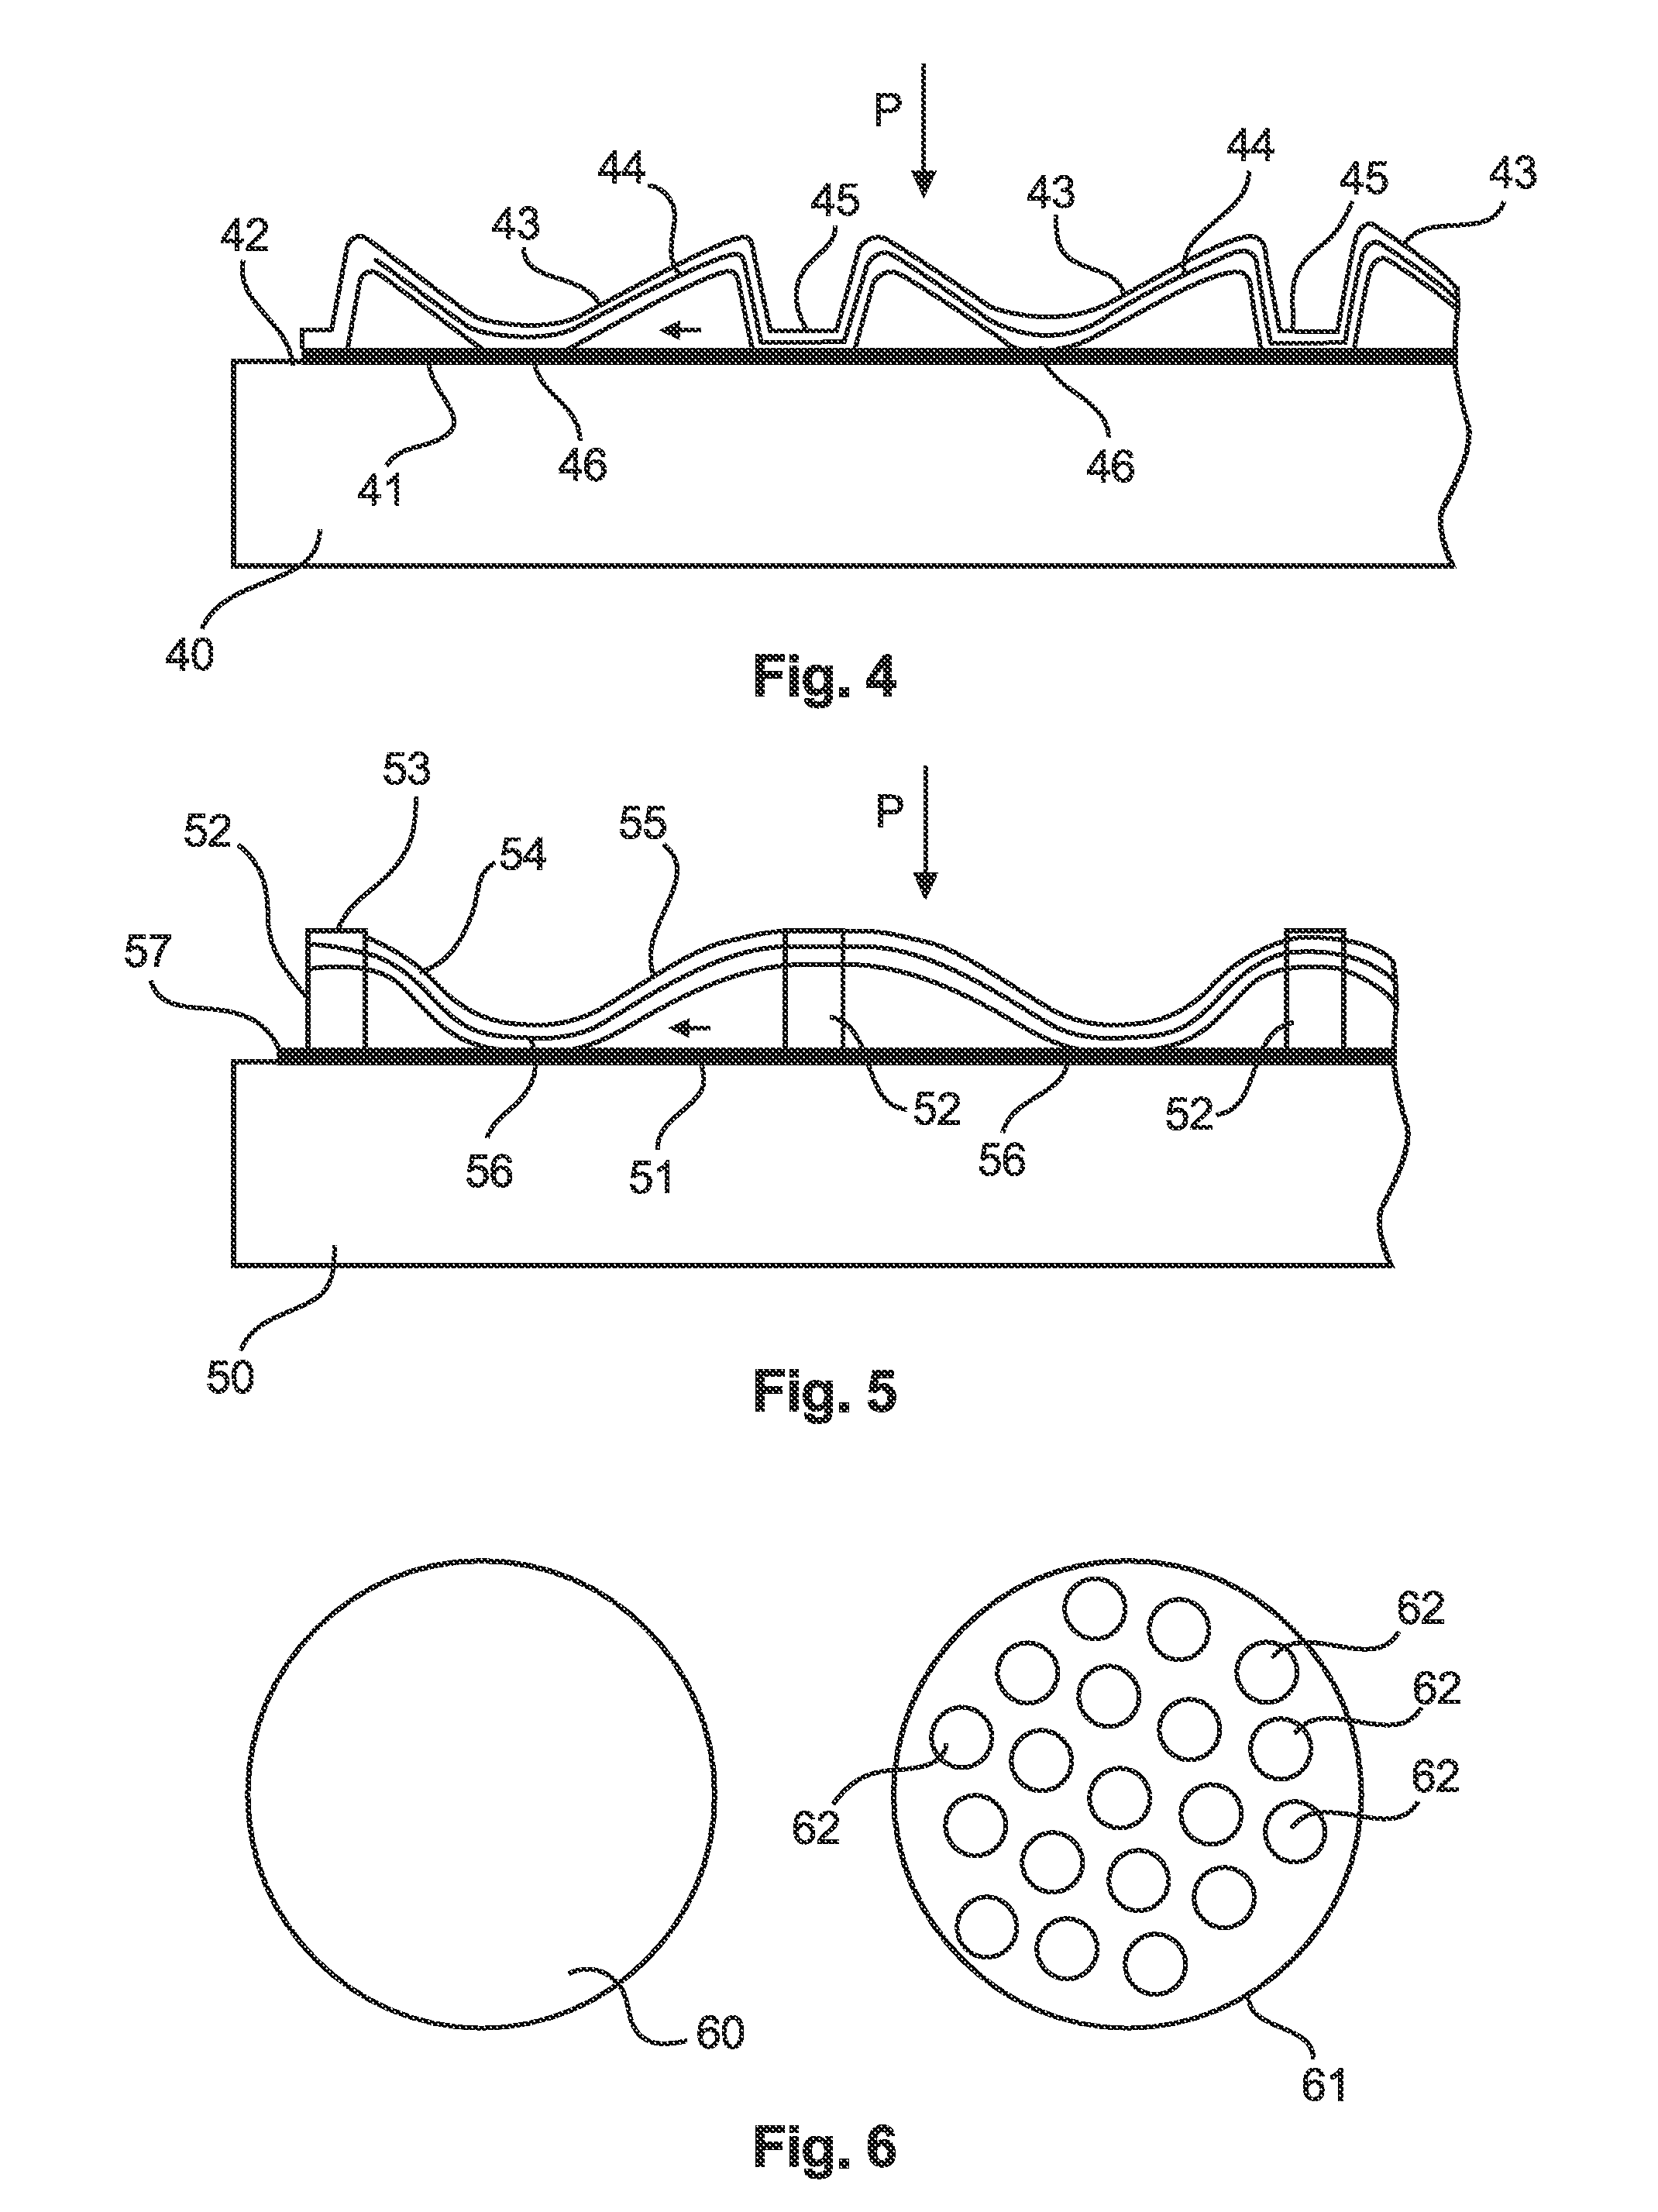 Collapsed mode capacitive sensor